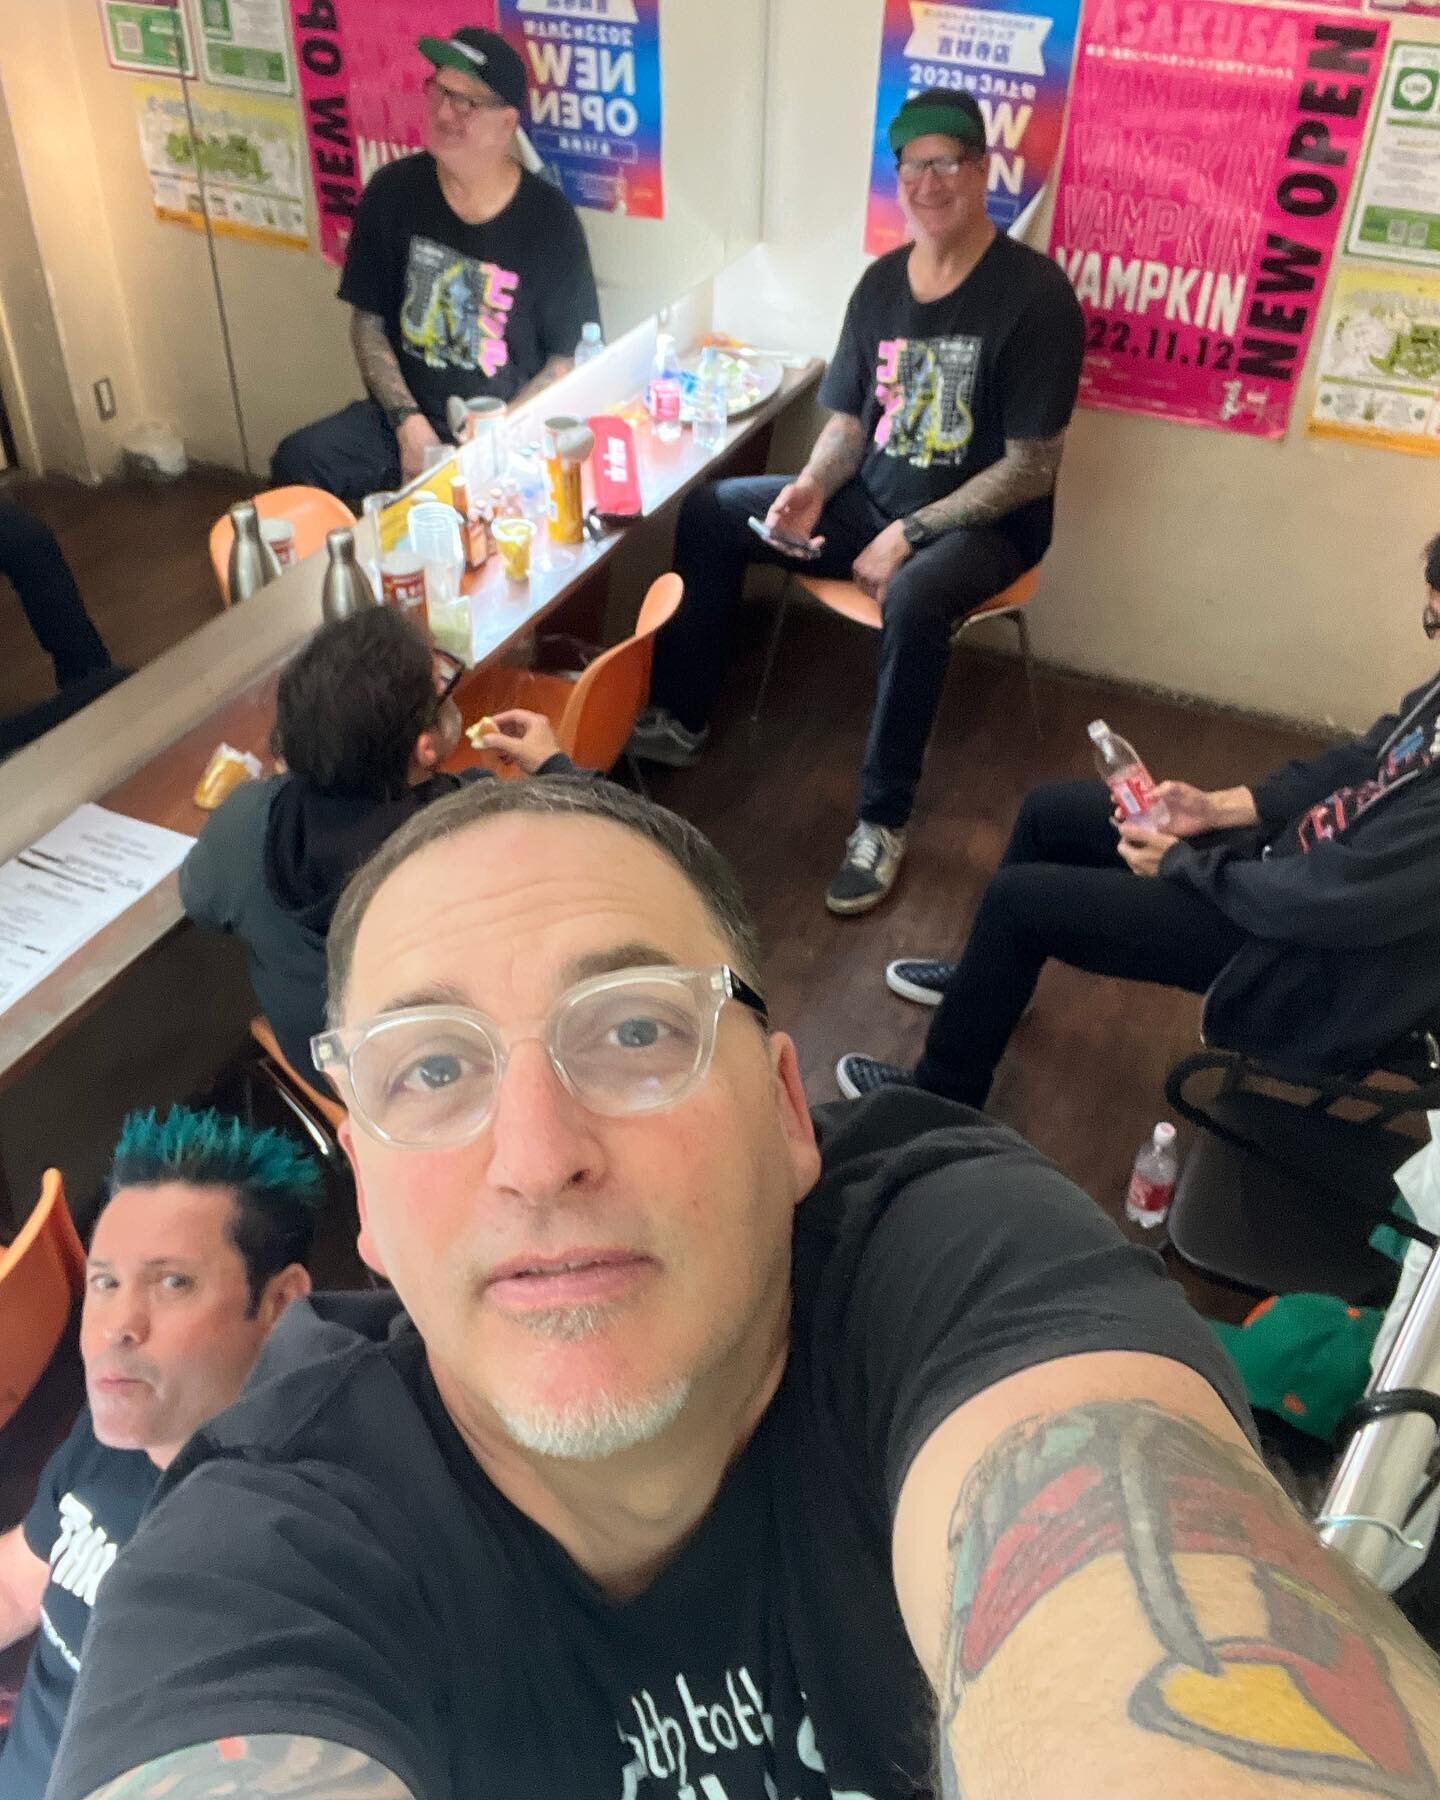 Who&rsquo;s ready for tonight? ??These fools that&rsquo;s who!!! See ya soon club Seata!!!Night ✌🏼 Lets get it !! Kanpai🍻🍻🍻💪🏼🥳⛩️🇯🇵🌸🪭🎉🎉🎉🎉🎉🎉

##lagwagon  #Forareason #icegrills #TokyoTown #Clubseata #NightTwo  #SoldOut 
#backstageglamo